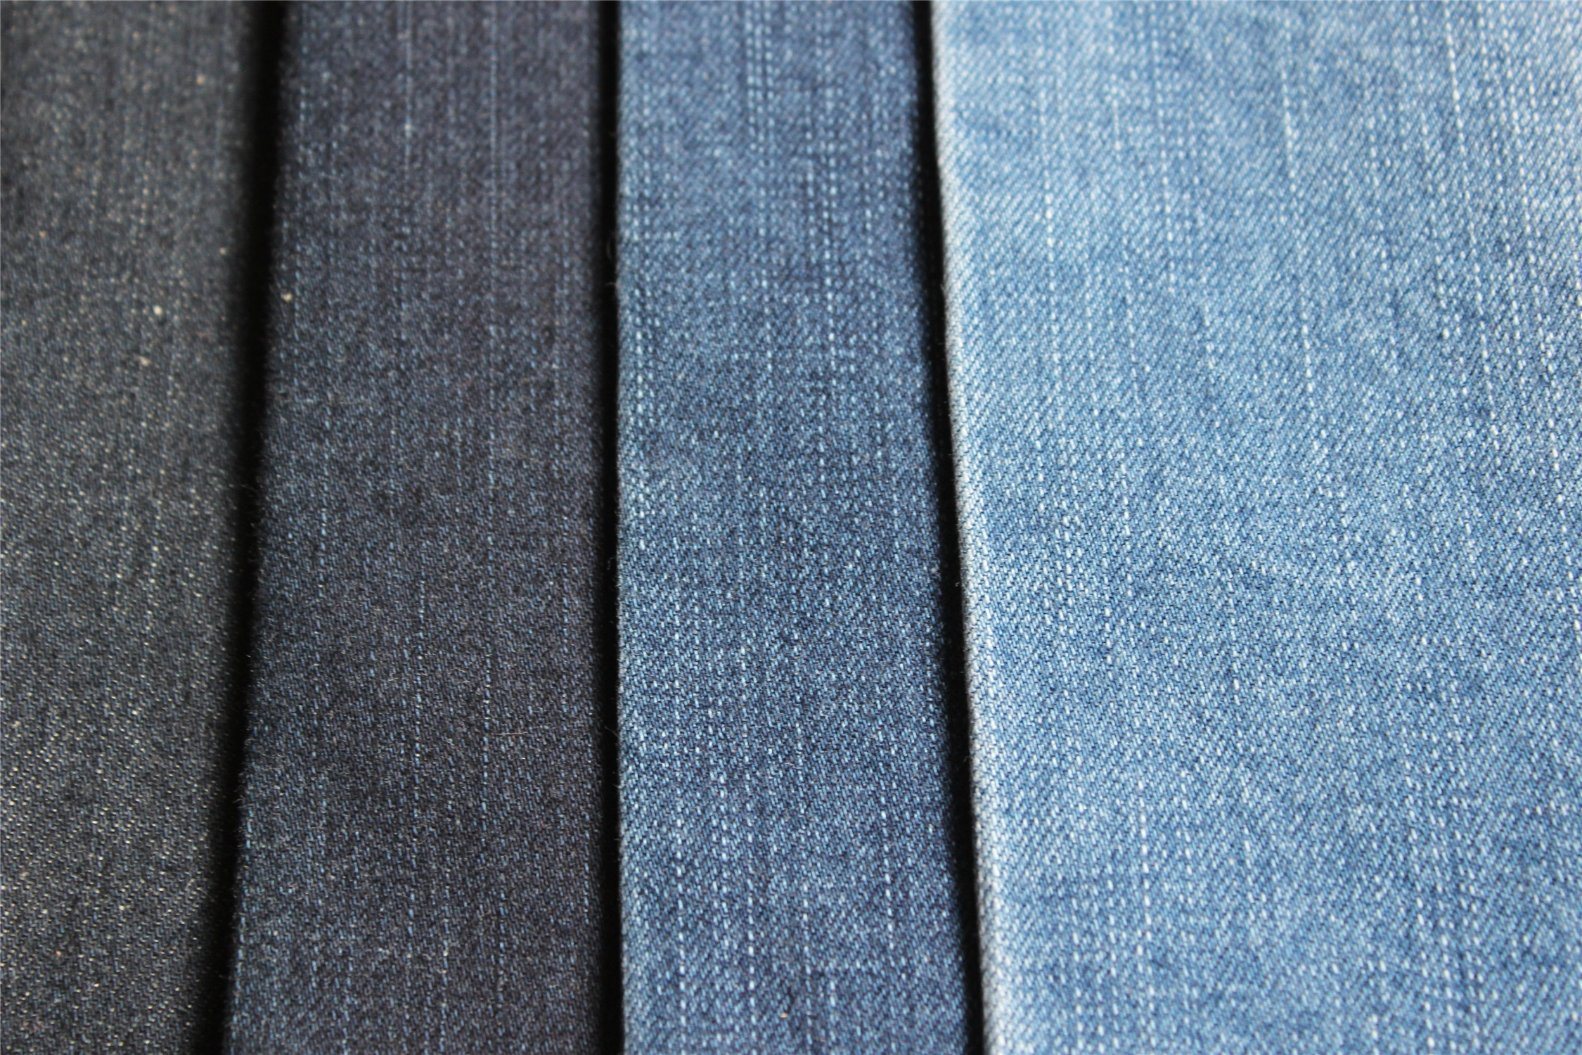 Heavy Weight Cotton Spandex Denim Fabric for Men's Jeans and Jacket